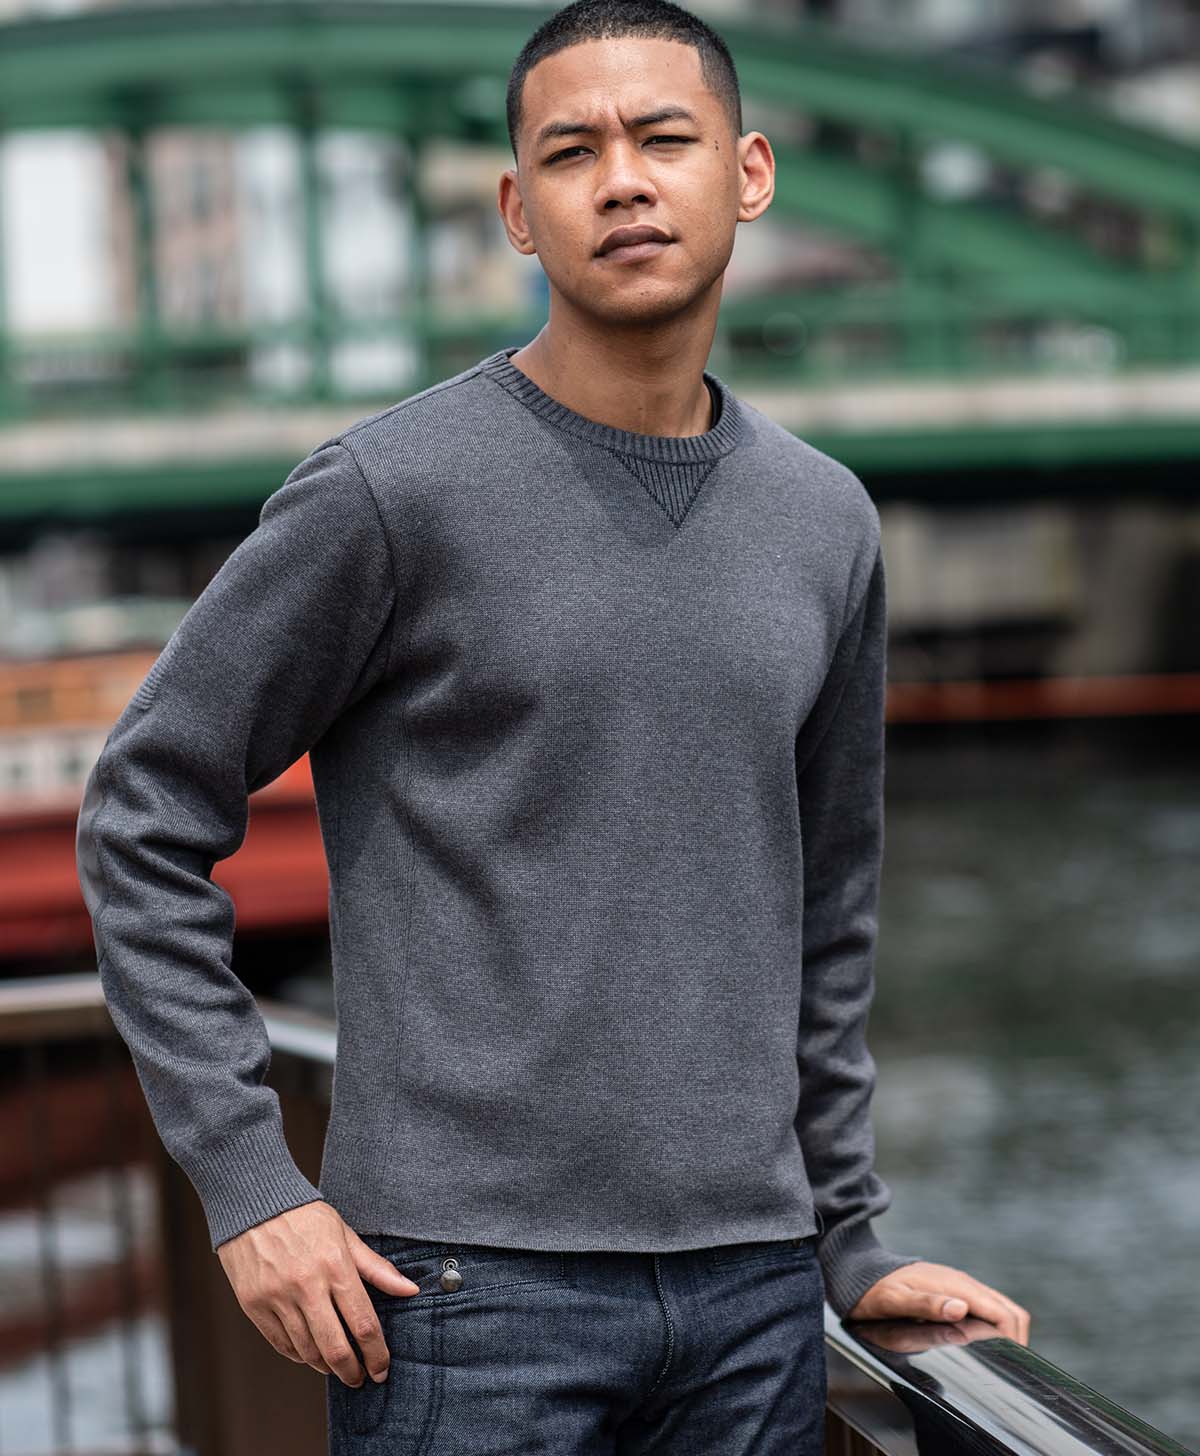 Sweater With Elbow Patches -  Hong Kong